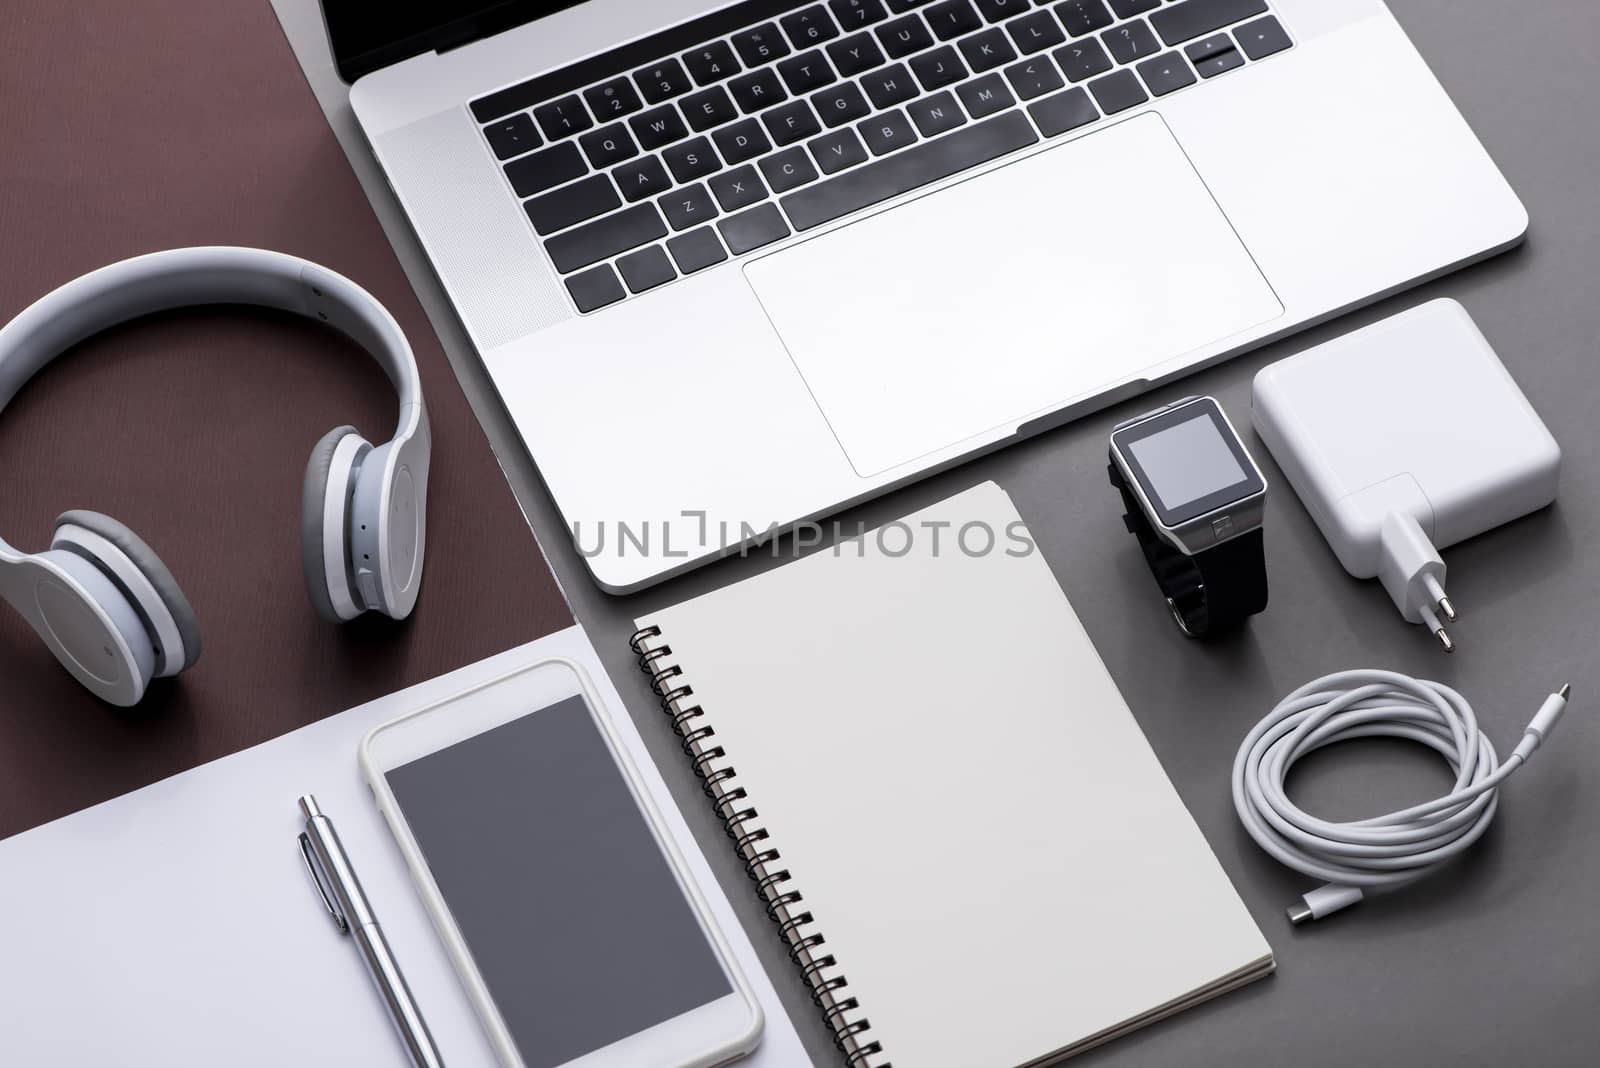 Set of black and white of office supplies and business gadgets.